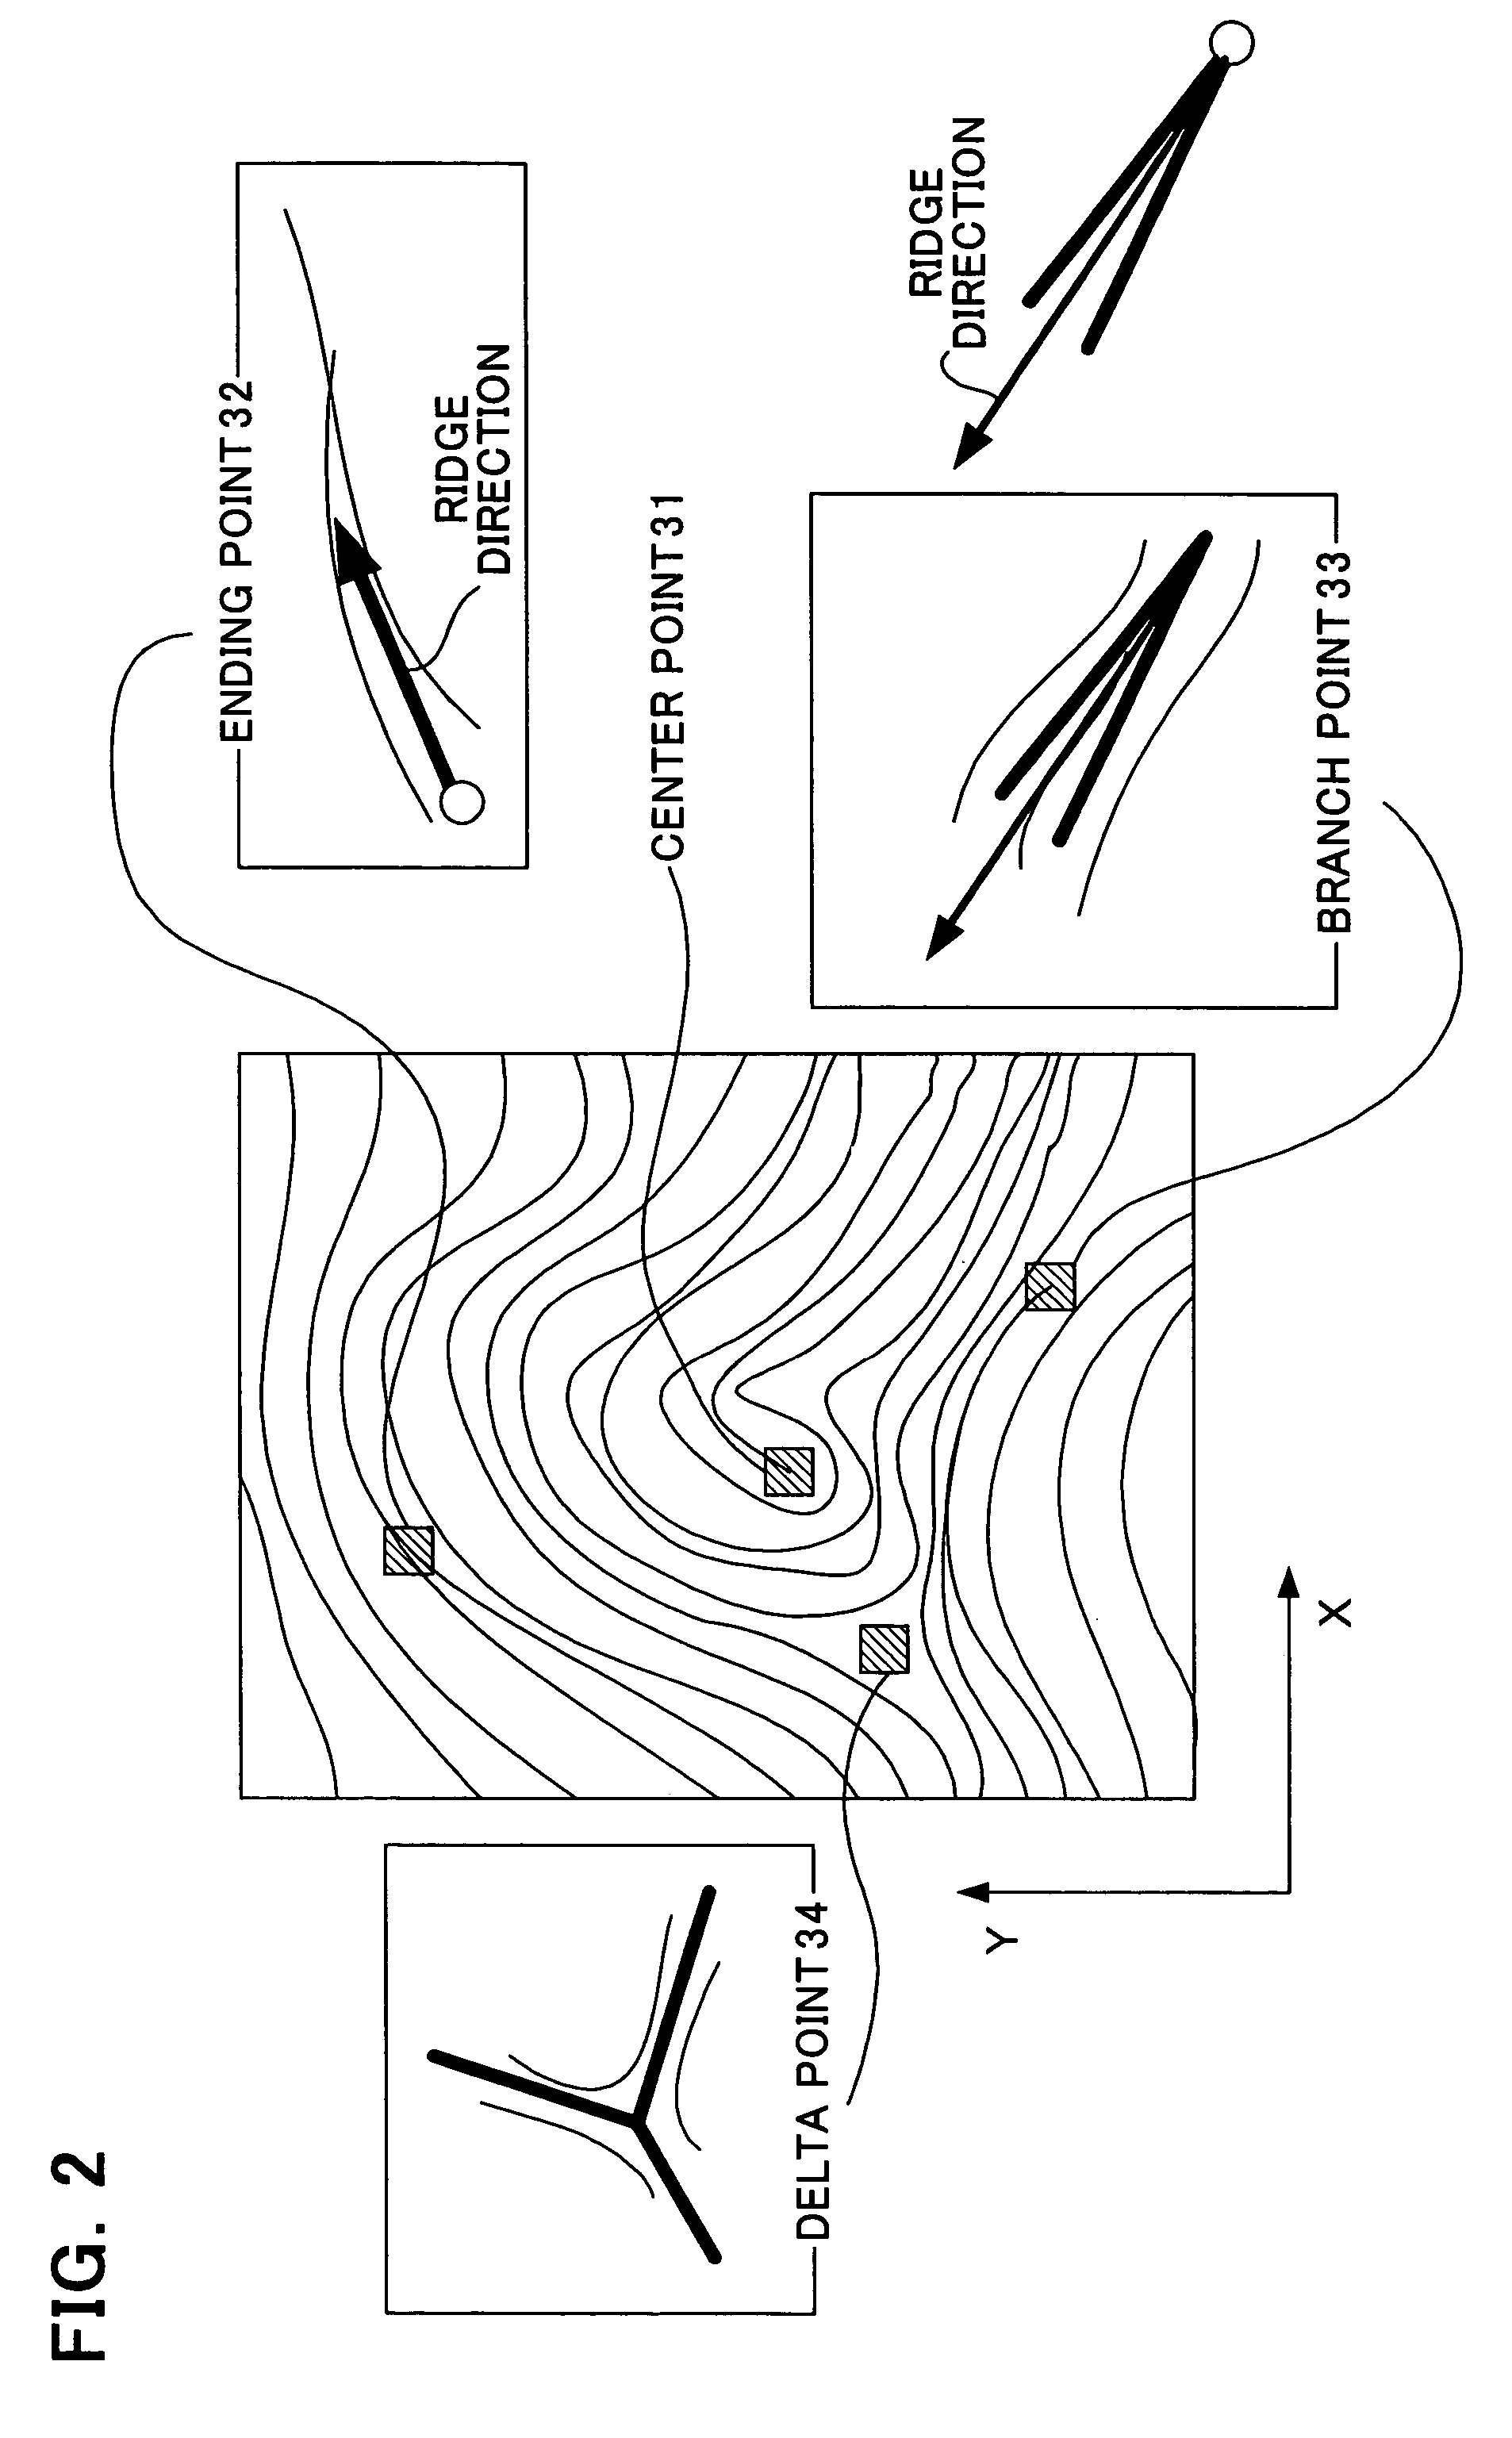 Authentication method based on biological characteristic information